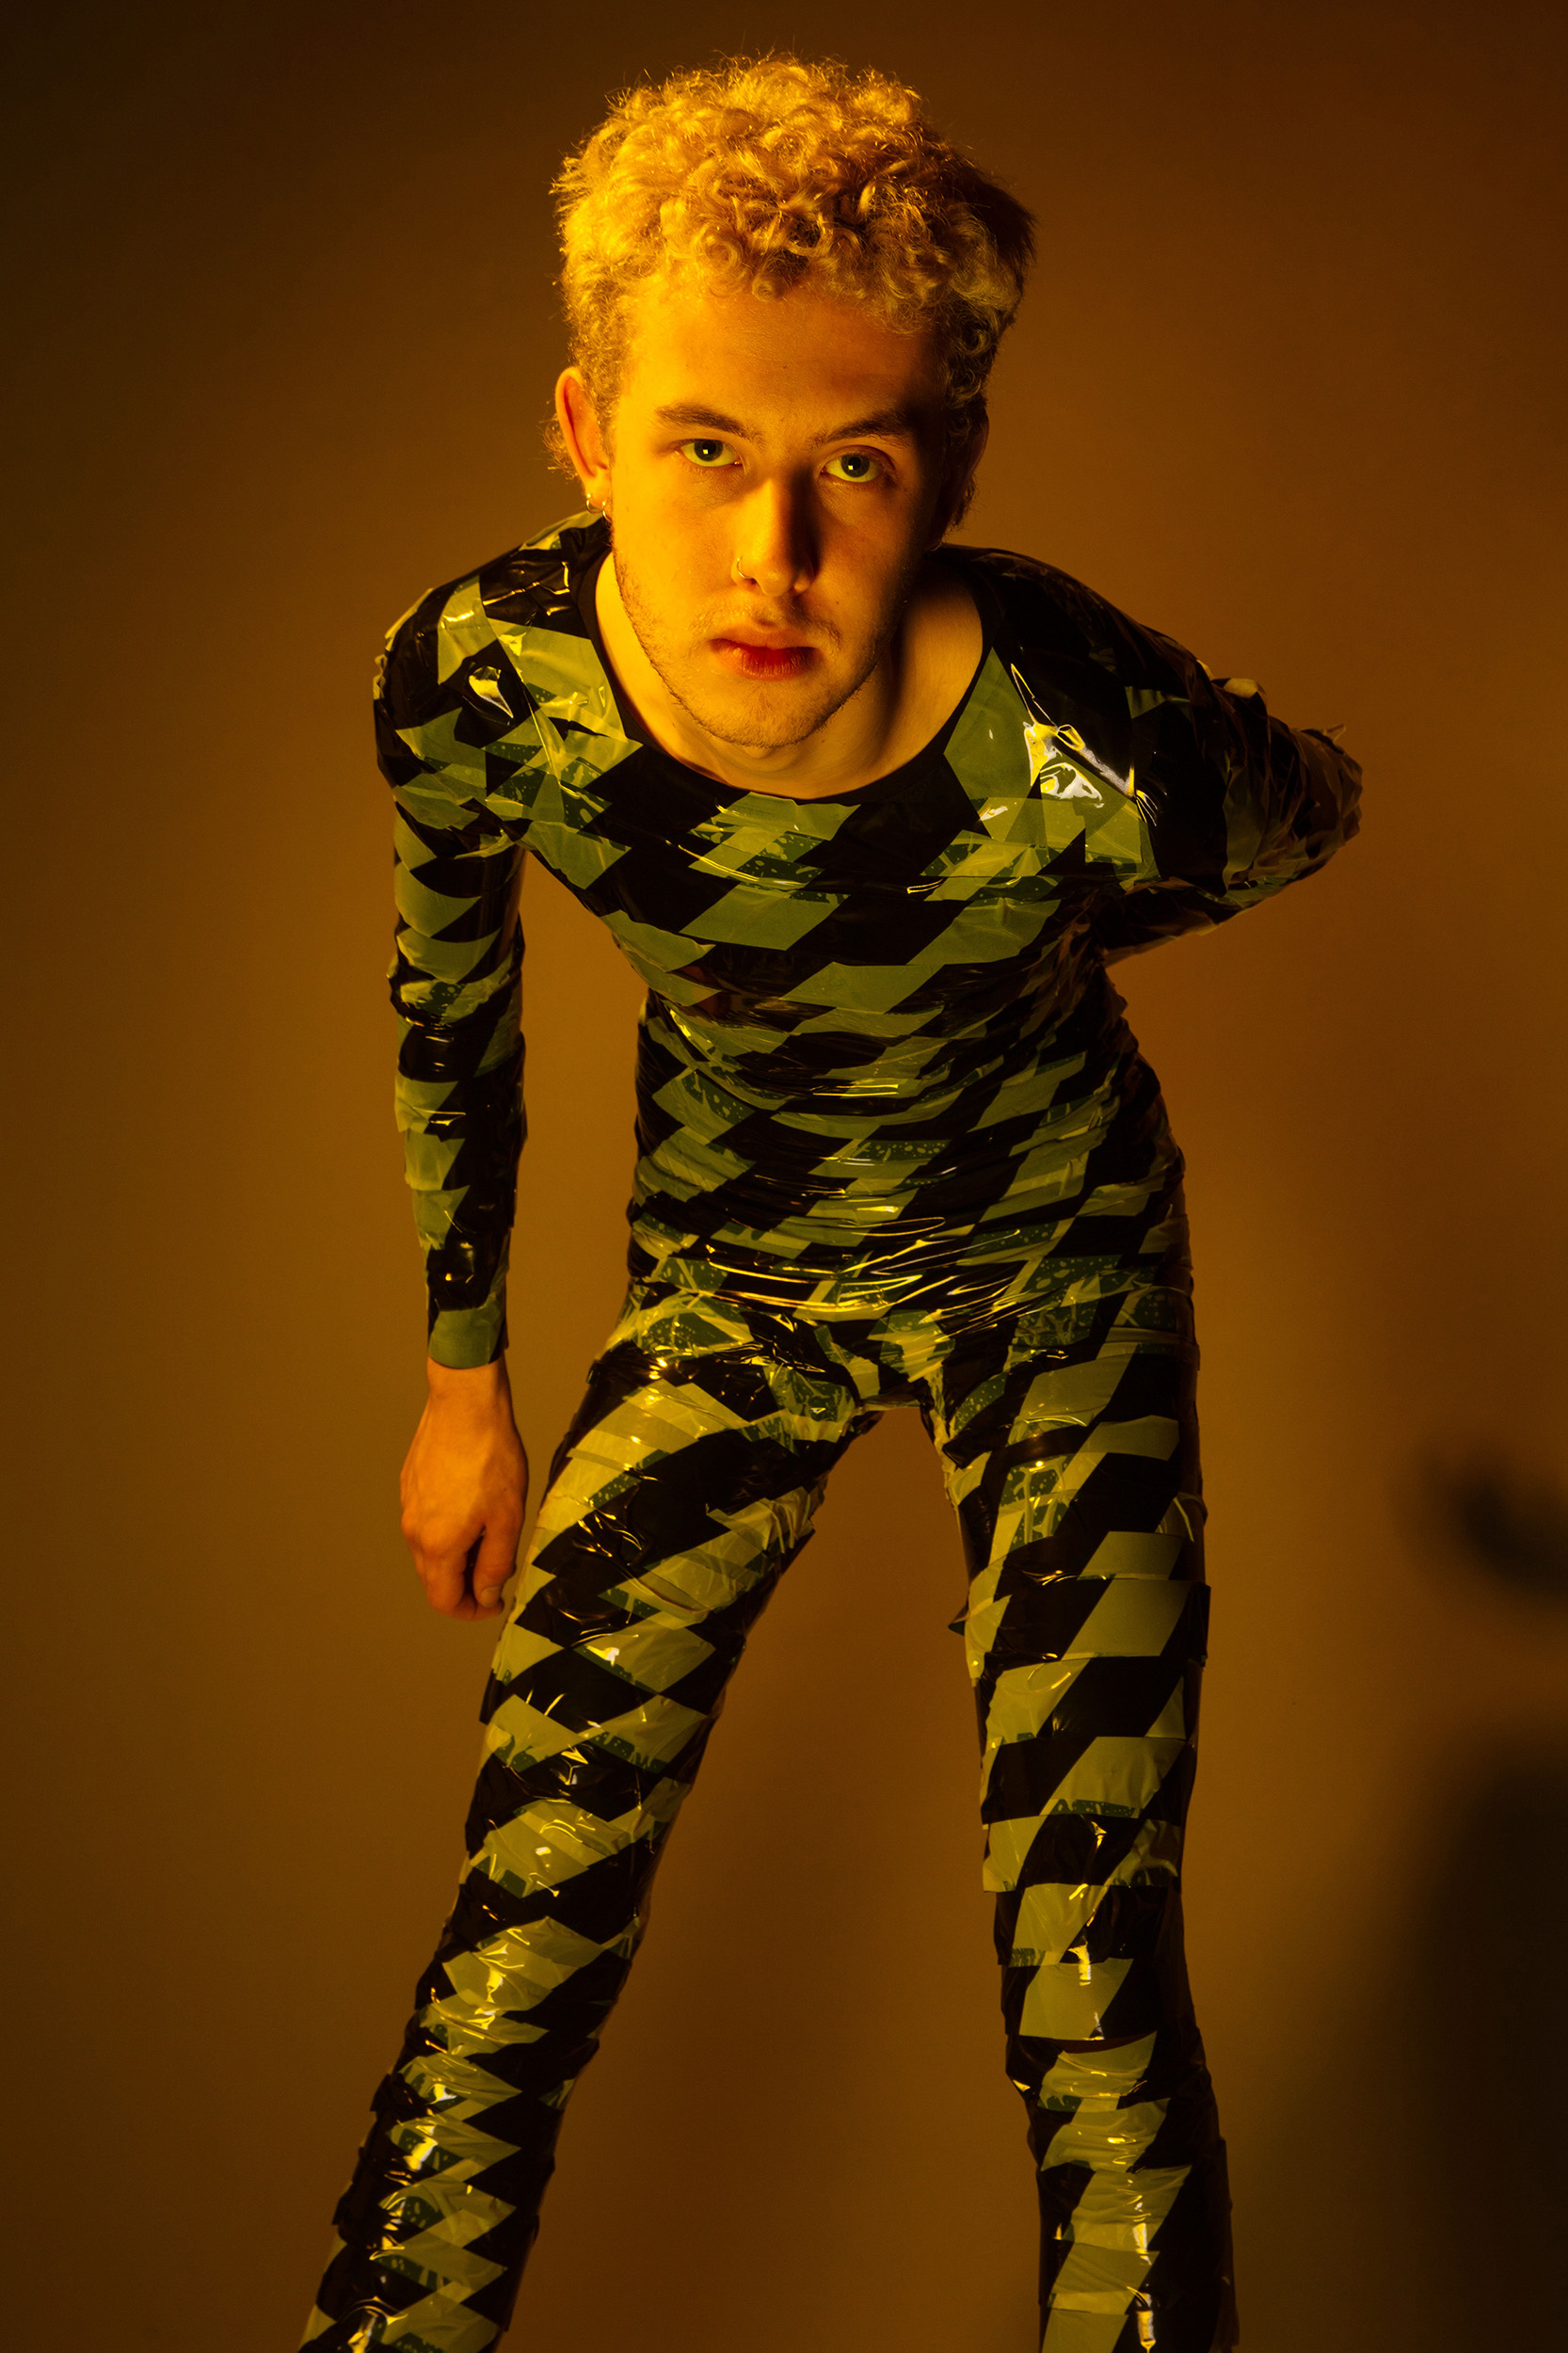 Photograph of model in plastic tape jumpsuit leaning towards camera against a yellow backdrop. Creative Direction and Styling by Rosie Parnham. Studio Photography by Ruby Williams.